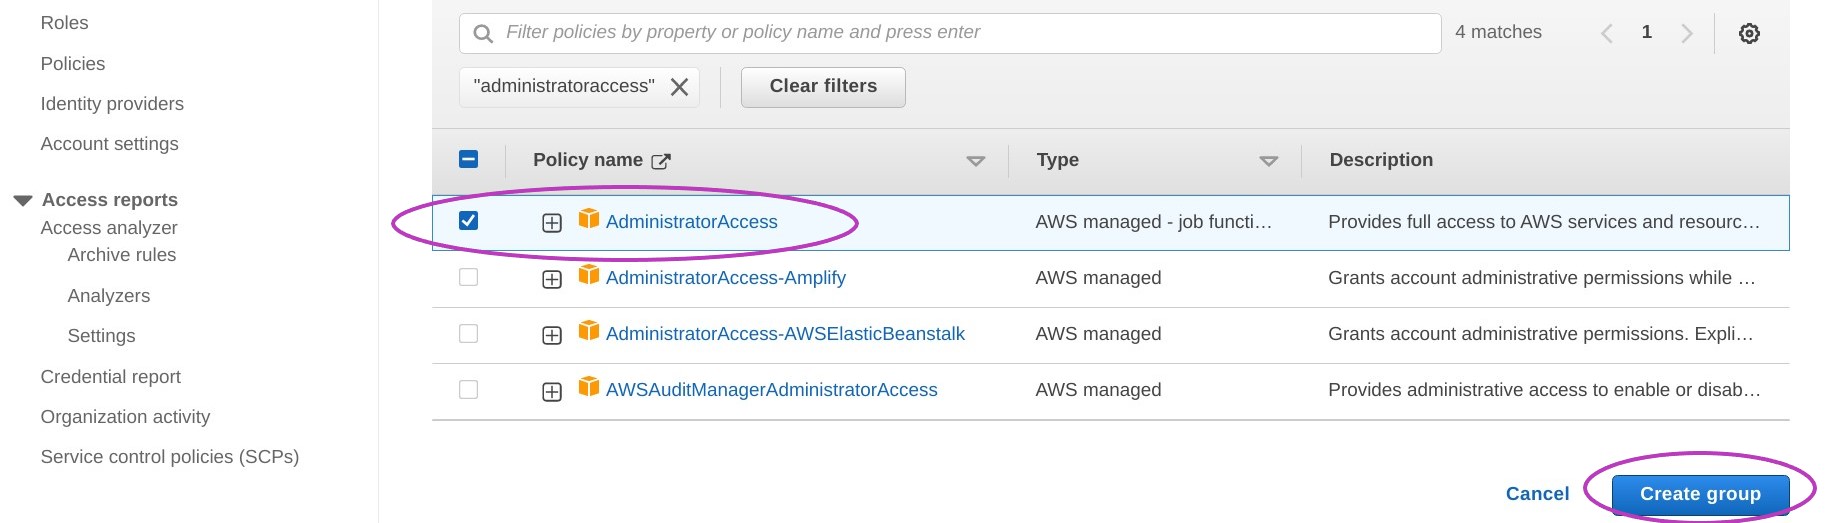 Screen shot of AWS Console "Attach Permissions Policies" section in a browser with the policy AdministratorAccess checked andcircled